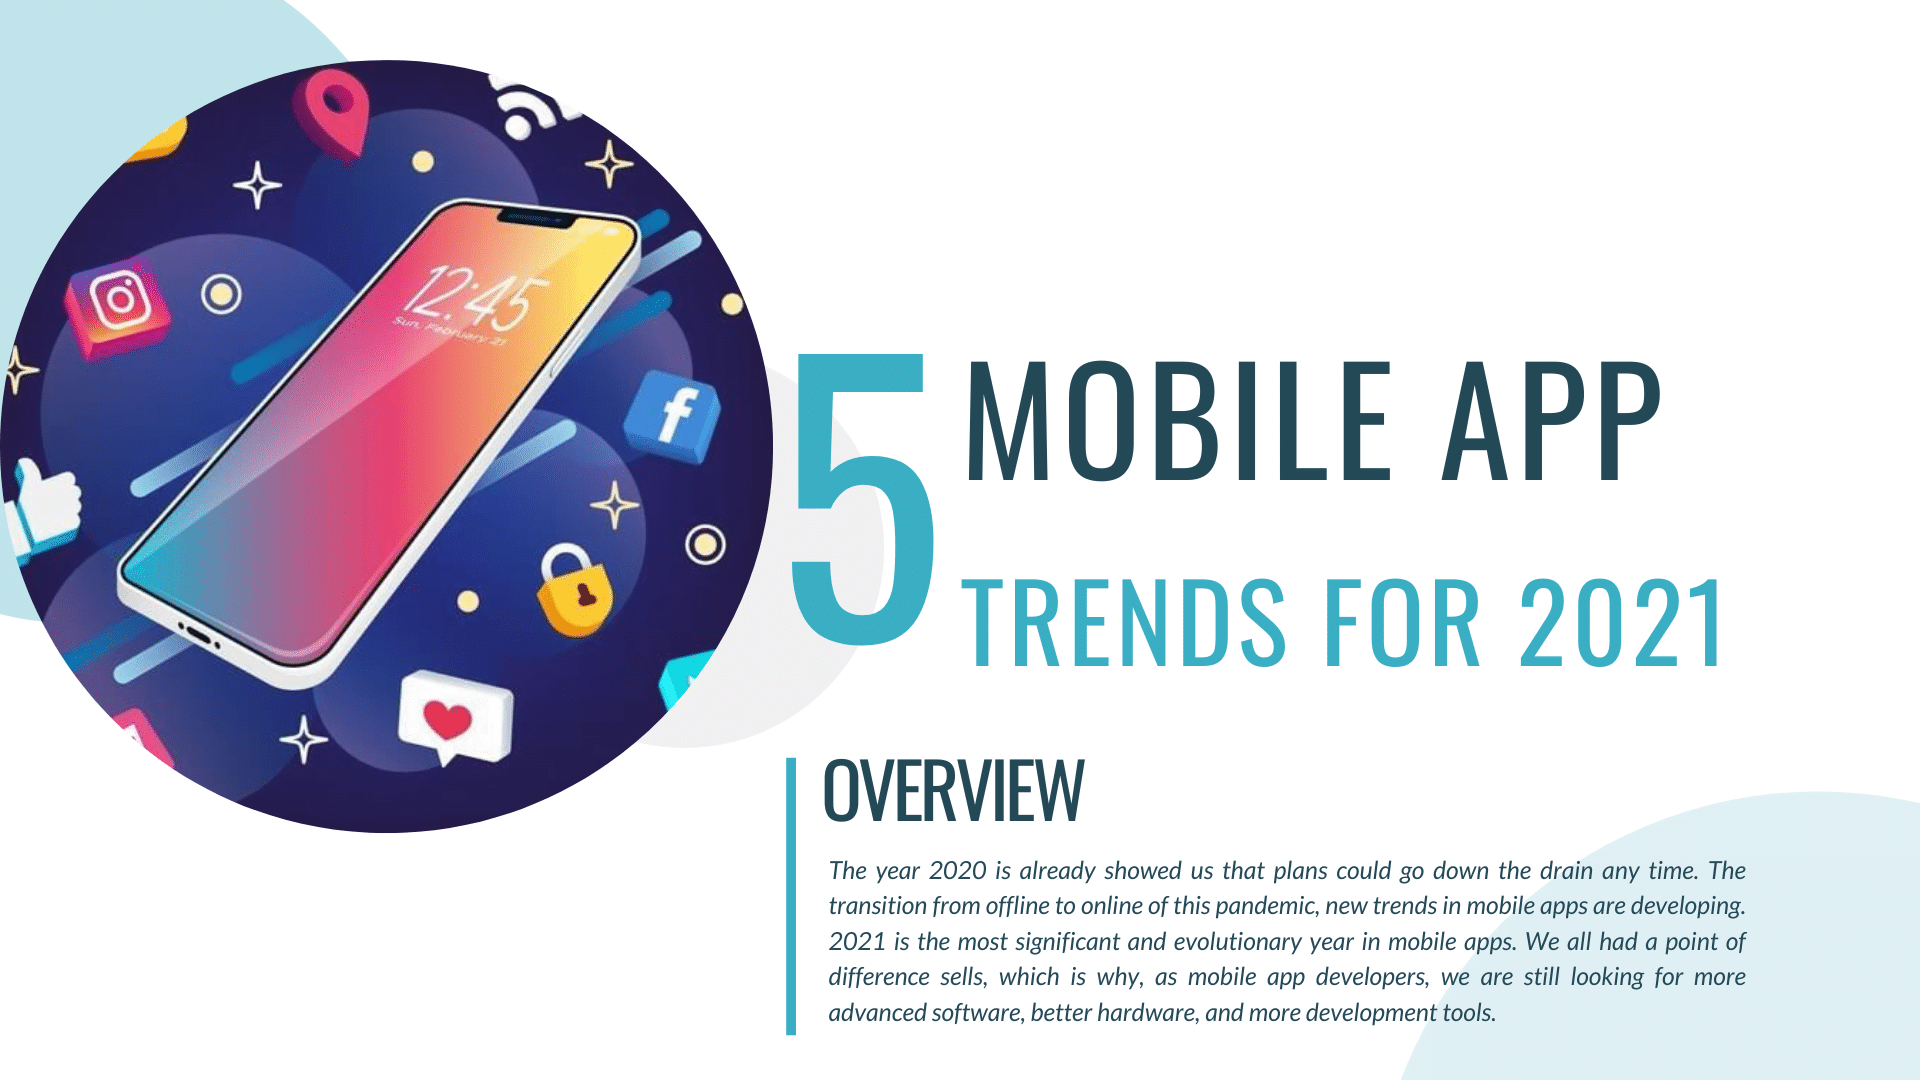 5 Mobile App Trends for 2021